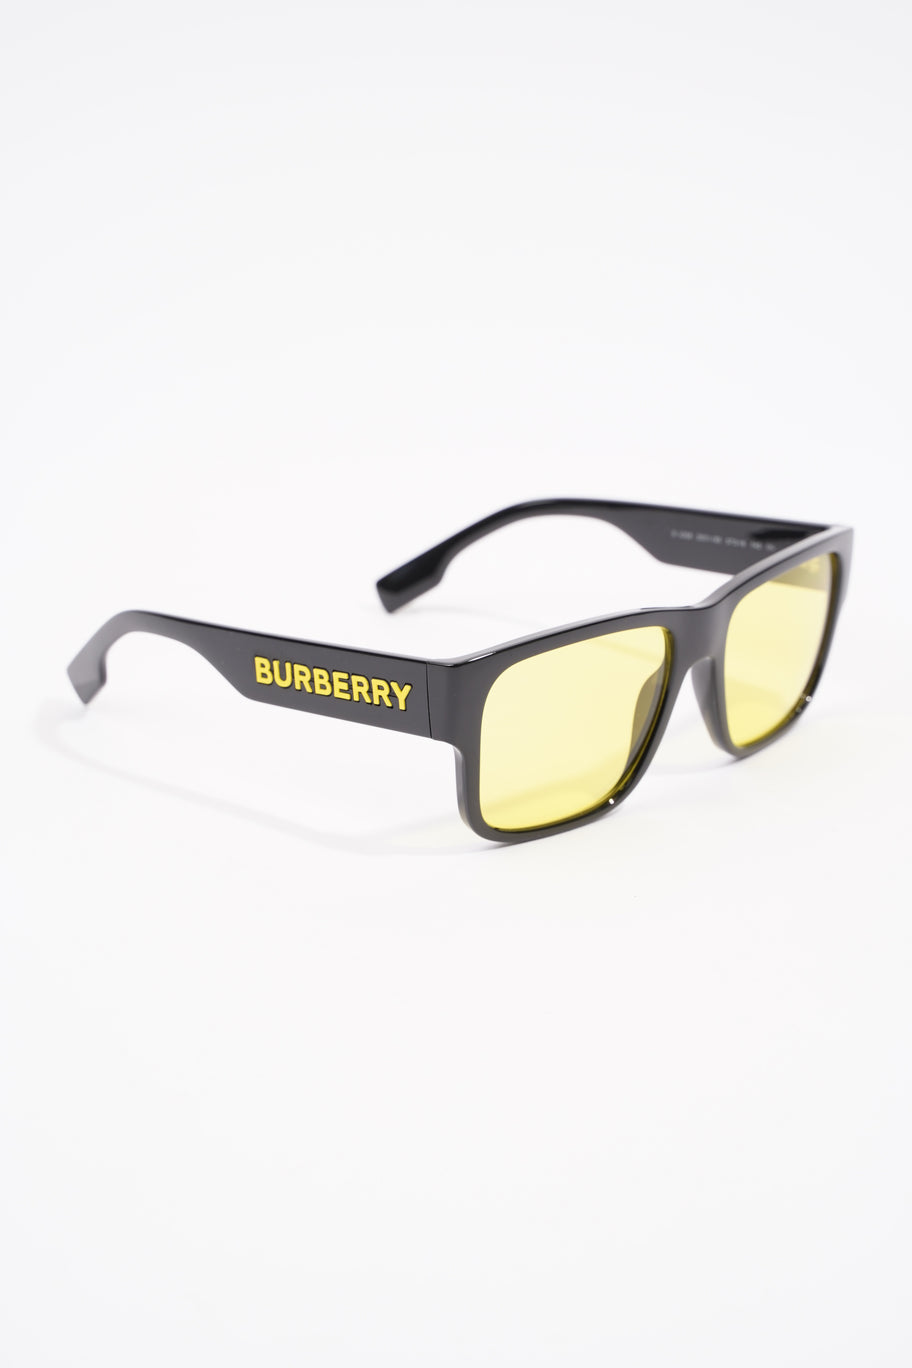 Knight Square Tinted Sunglasses Black / Yellow Acetate 145mm Image 2